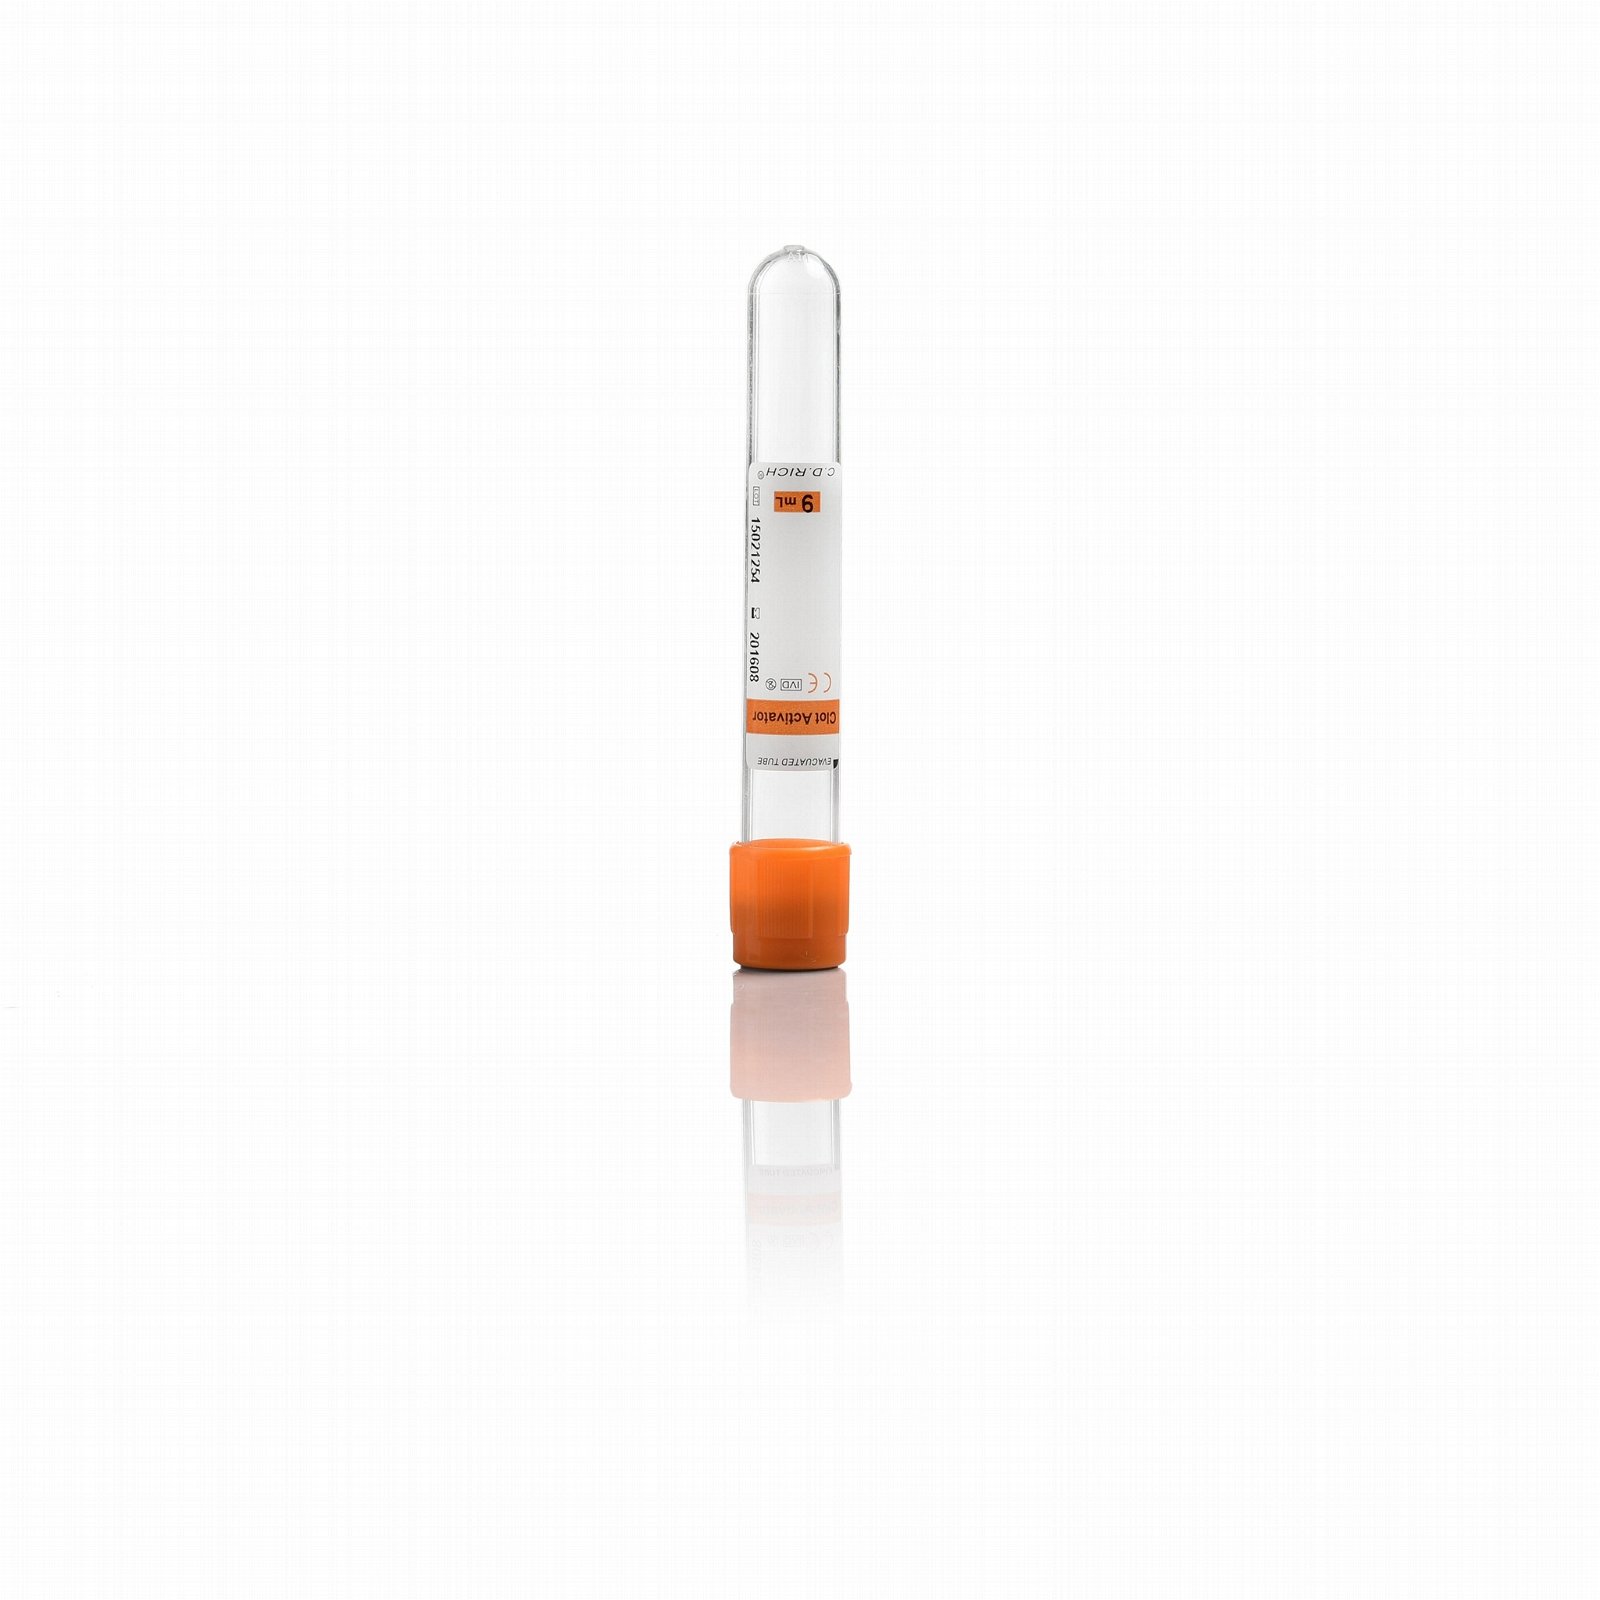 Clot Activator Tubes Evacuated Blood Collection Serum Tube, Test Tube for Blood  2